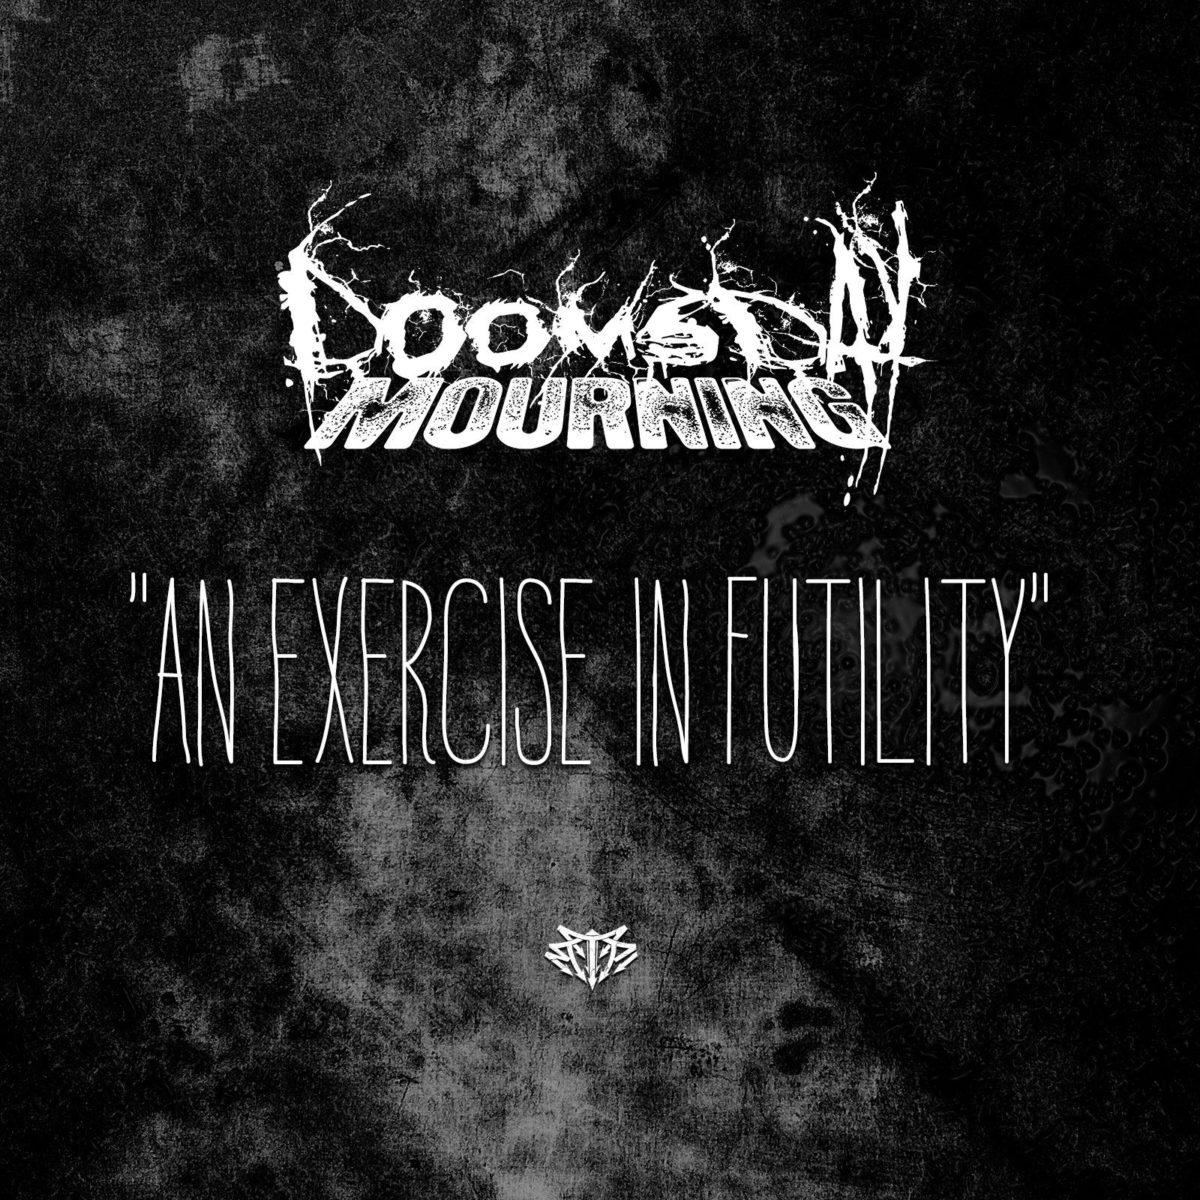 Doomsday Mourning - An Exercise in Futlity - Debut Single Now Available on iTunes Spotify Amazon and more.